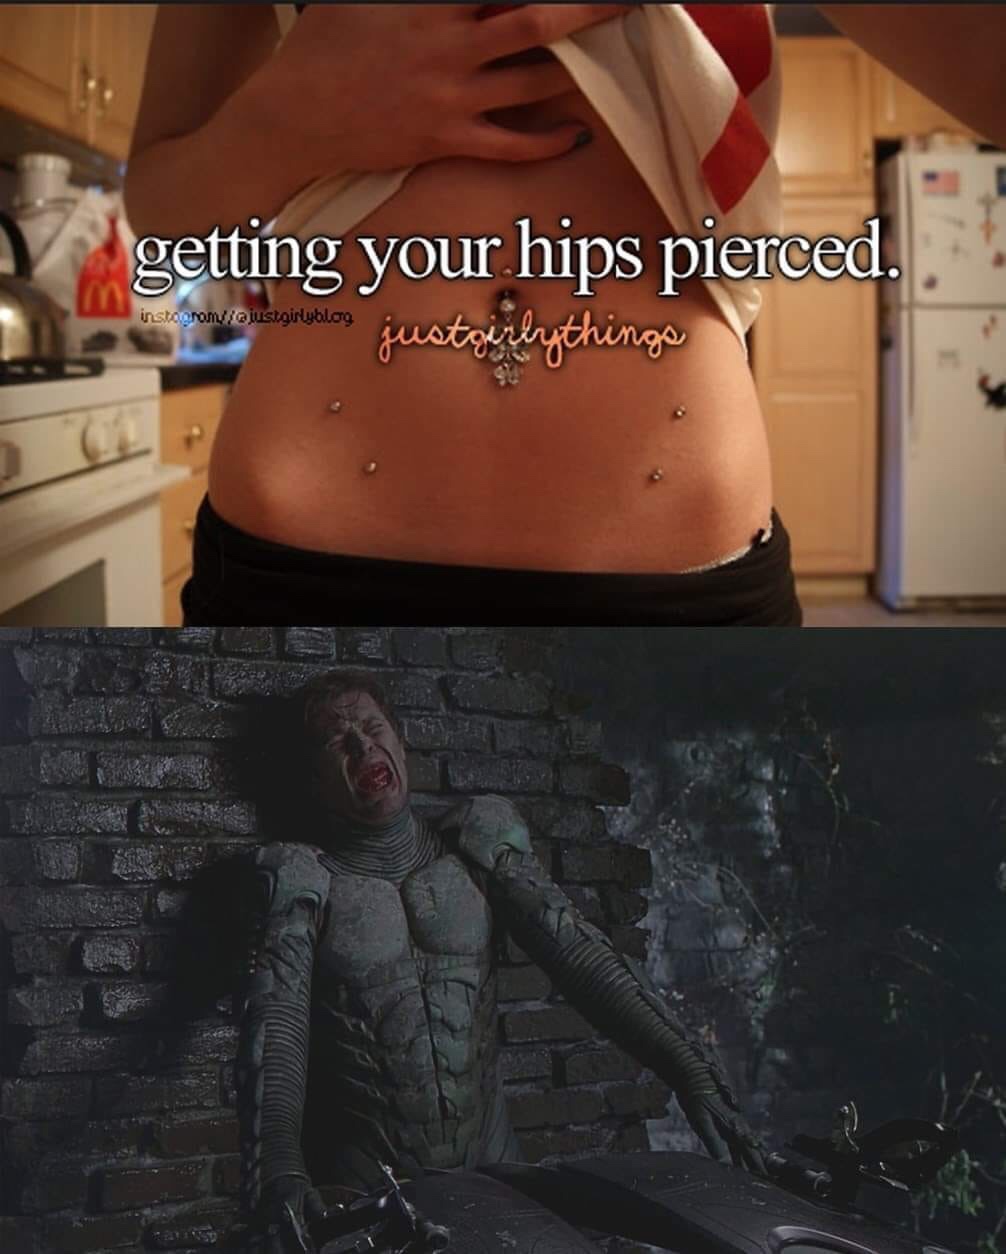 getting your hips pierced - getting your hips pierced. justgirly things instore rom